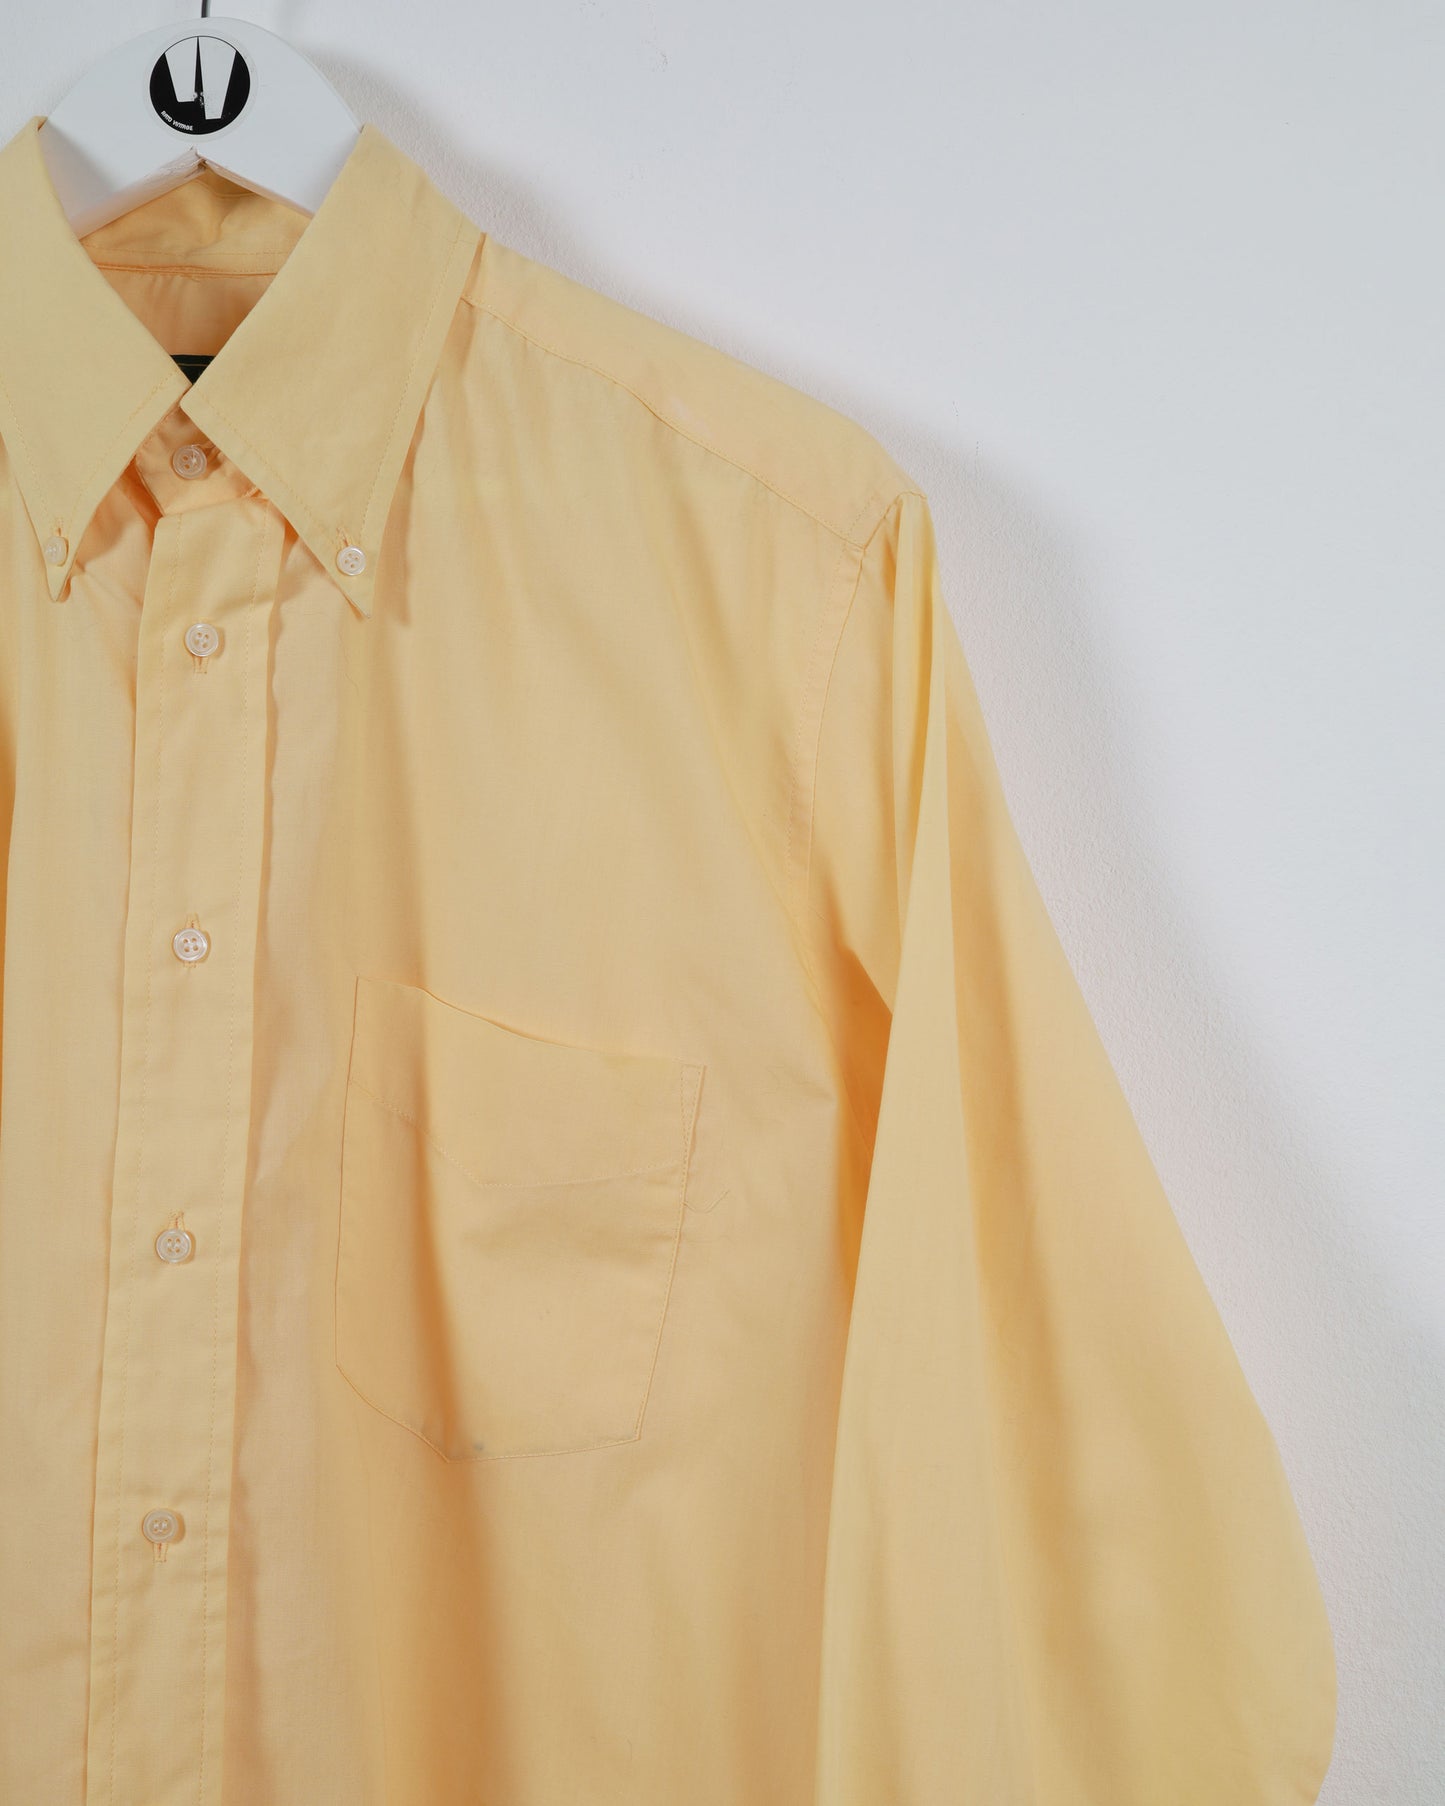 Oxer Button Up Long Sleeve Shirt in Yellow L